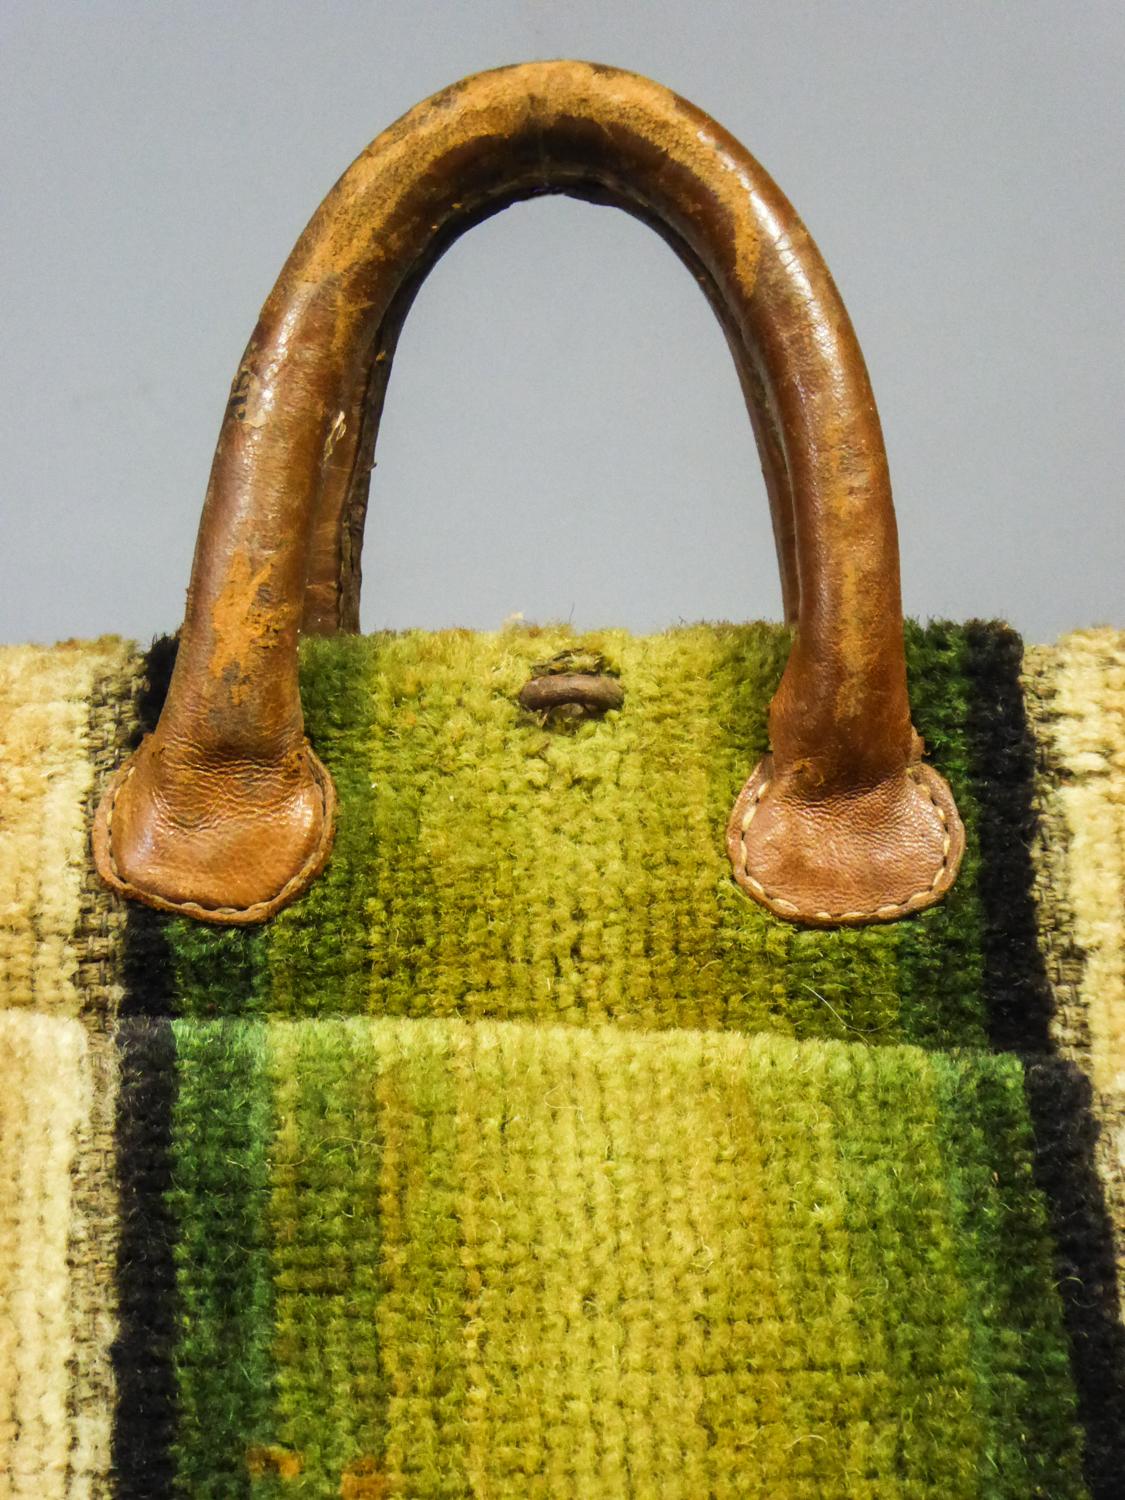 Brown Travel Bag in Cut Wool Tapestry and Leather - France Late 18th century